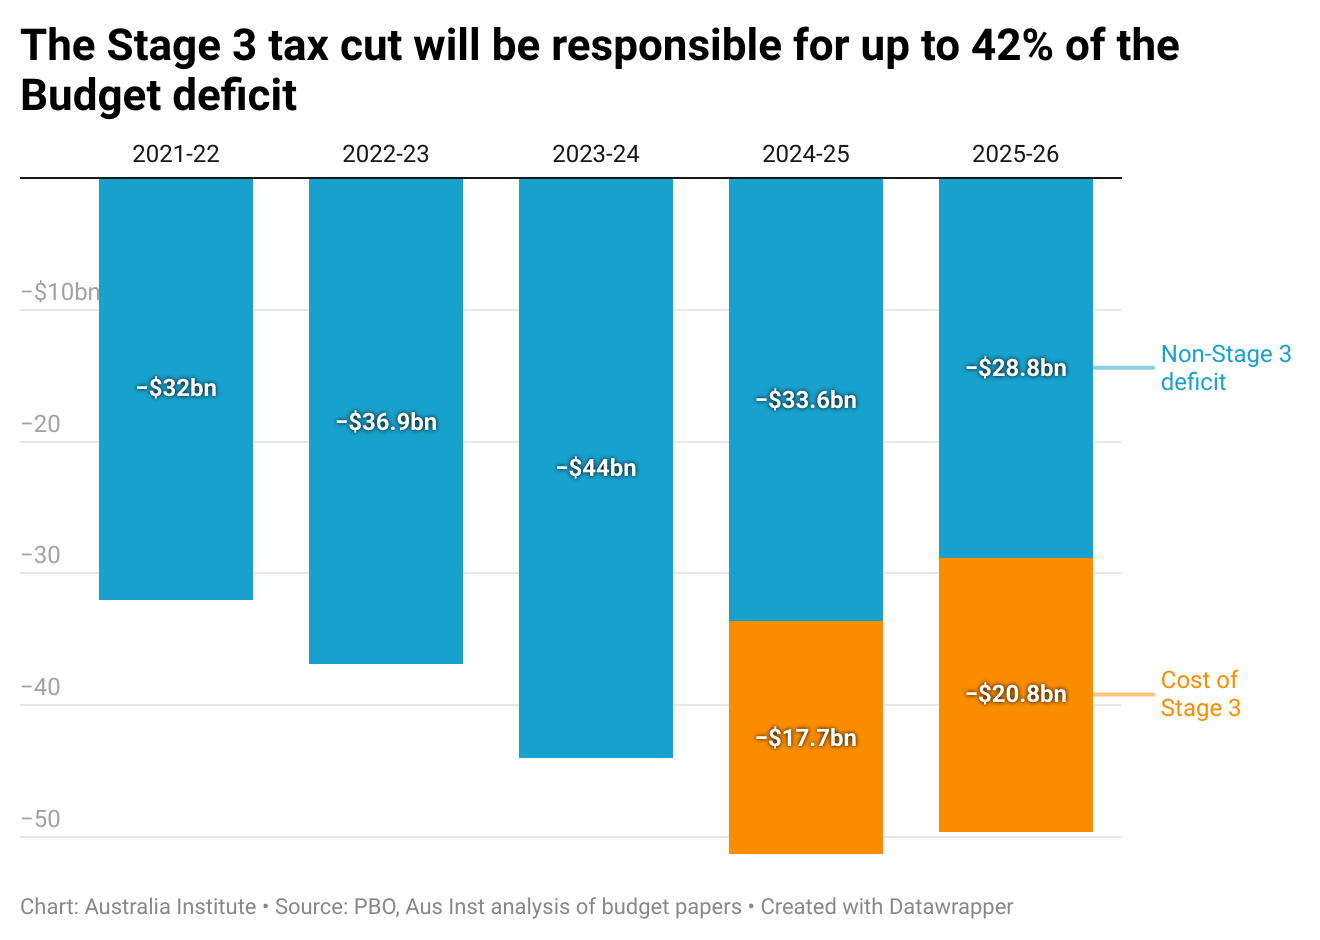 The Stage 3 tax cuts will be responsible for up to 42 of the Budget